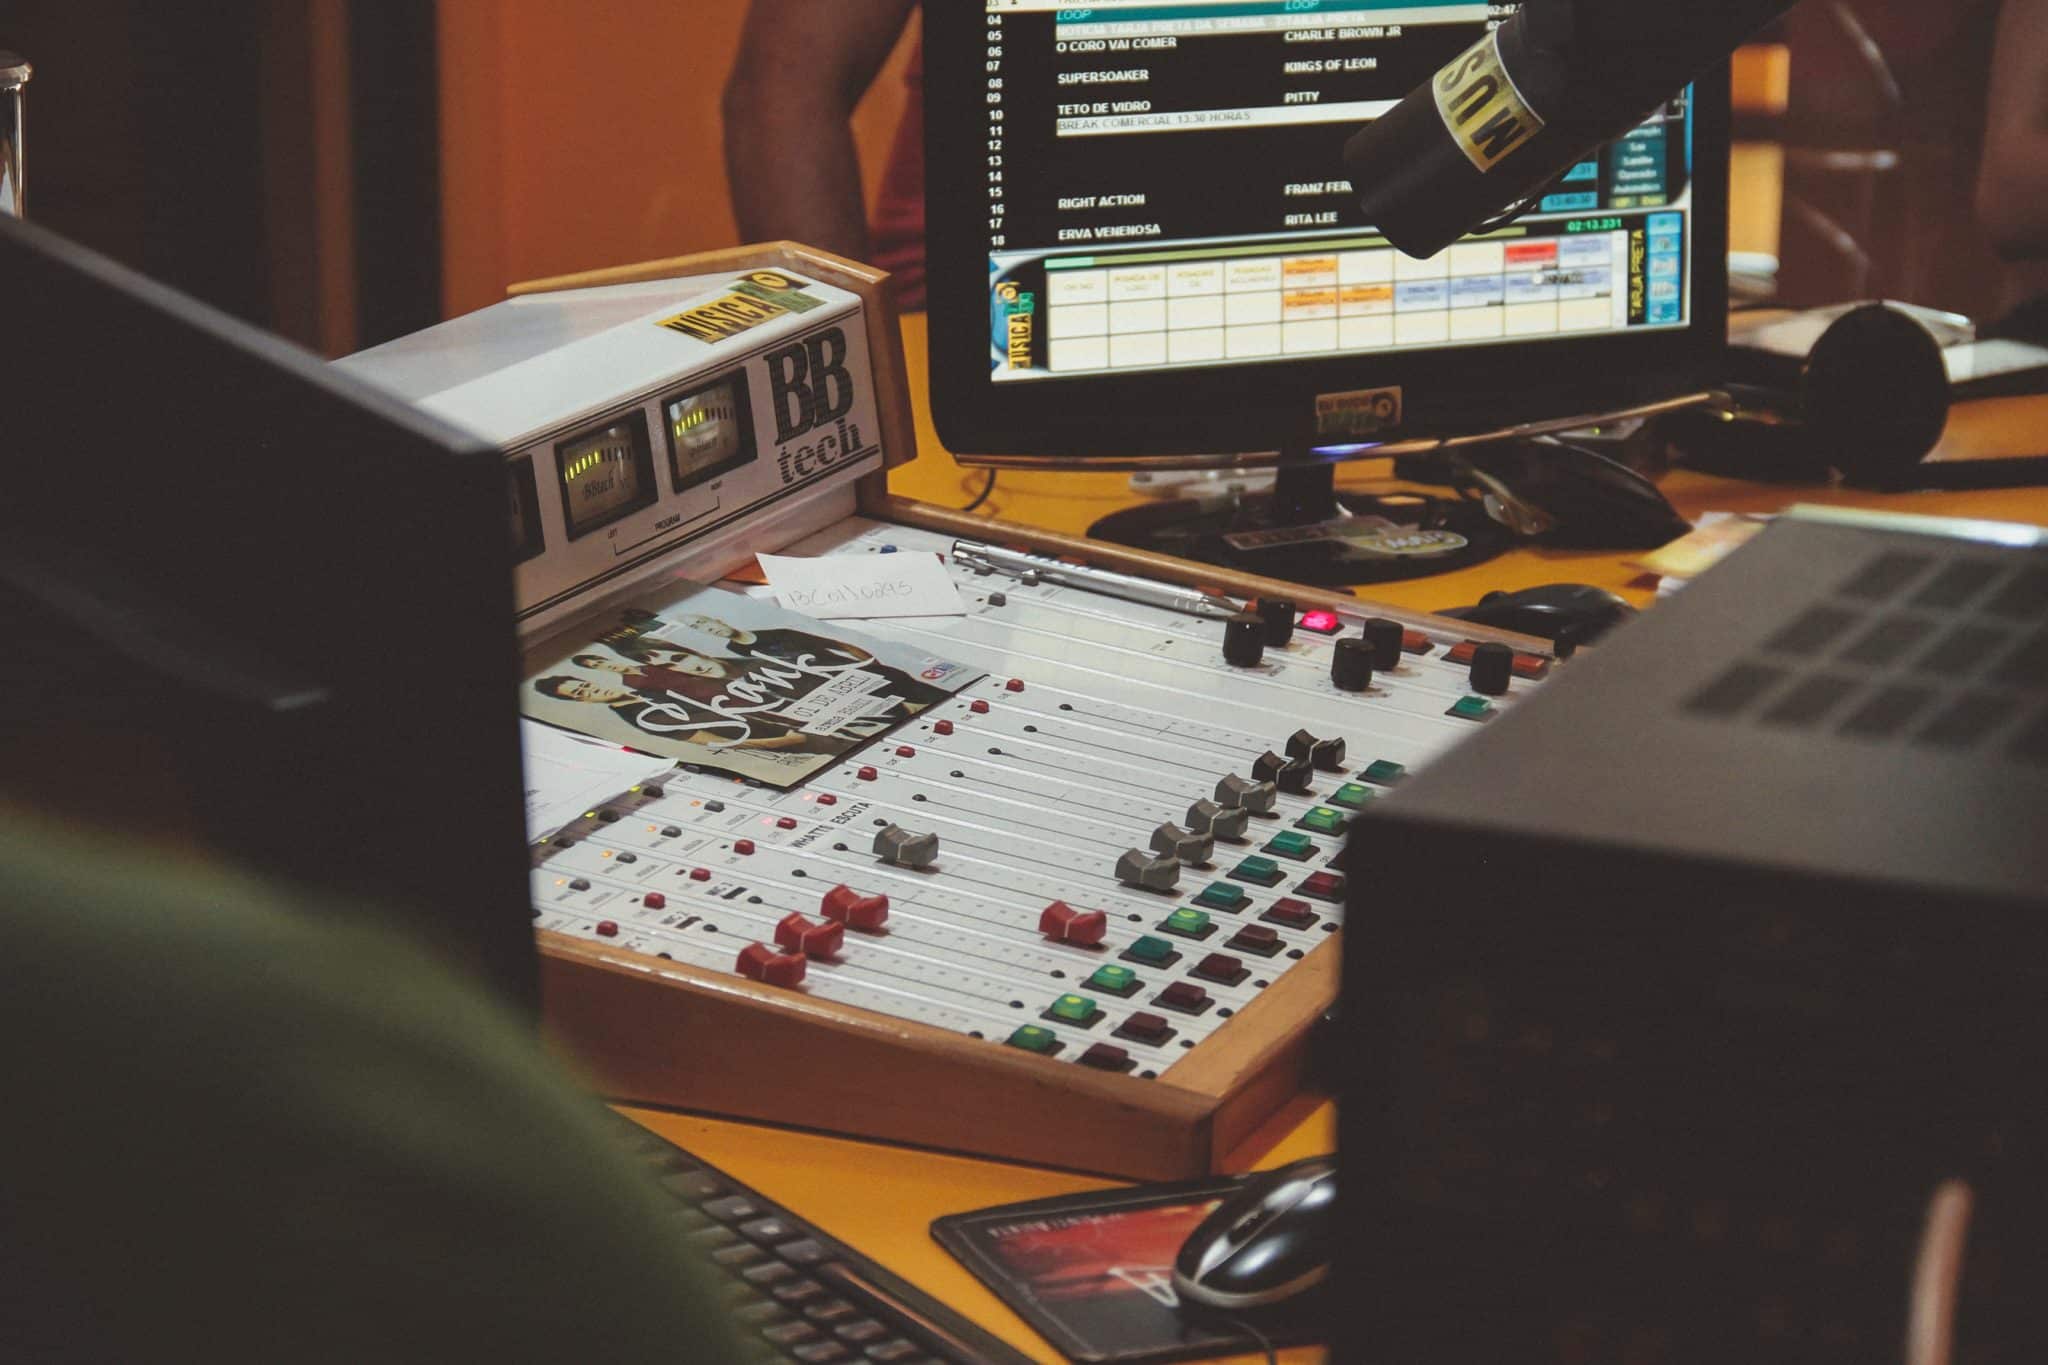 A radio station mixing board and computer